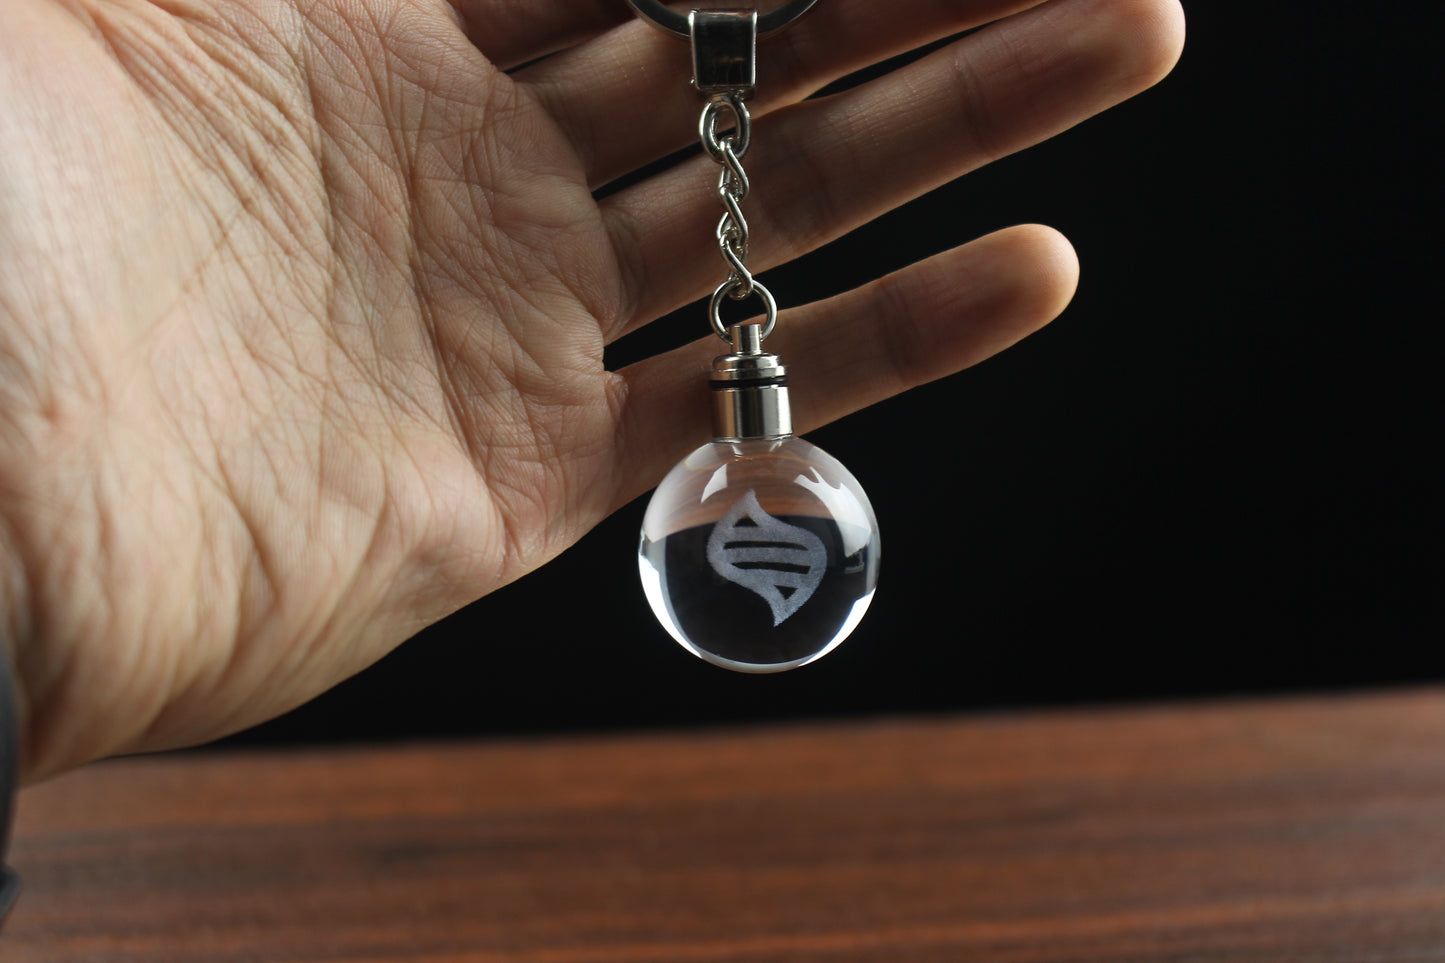 Mega Stone Engraved in Crystal Ball Keychain